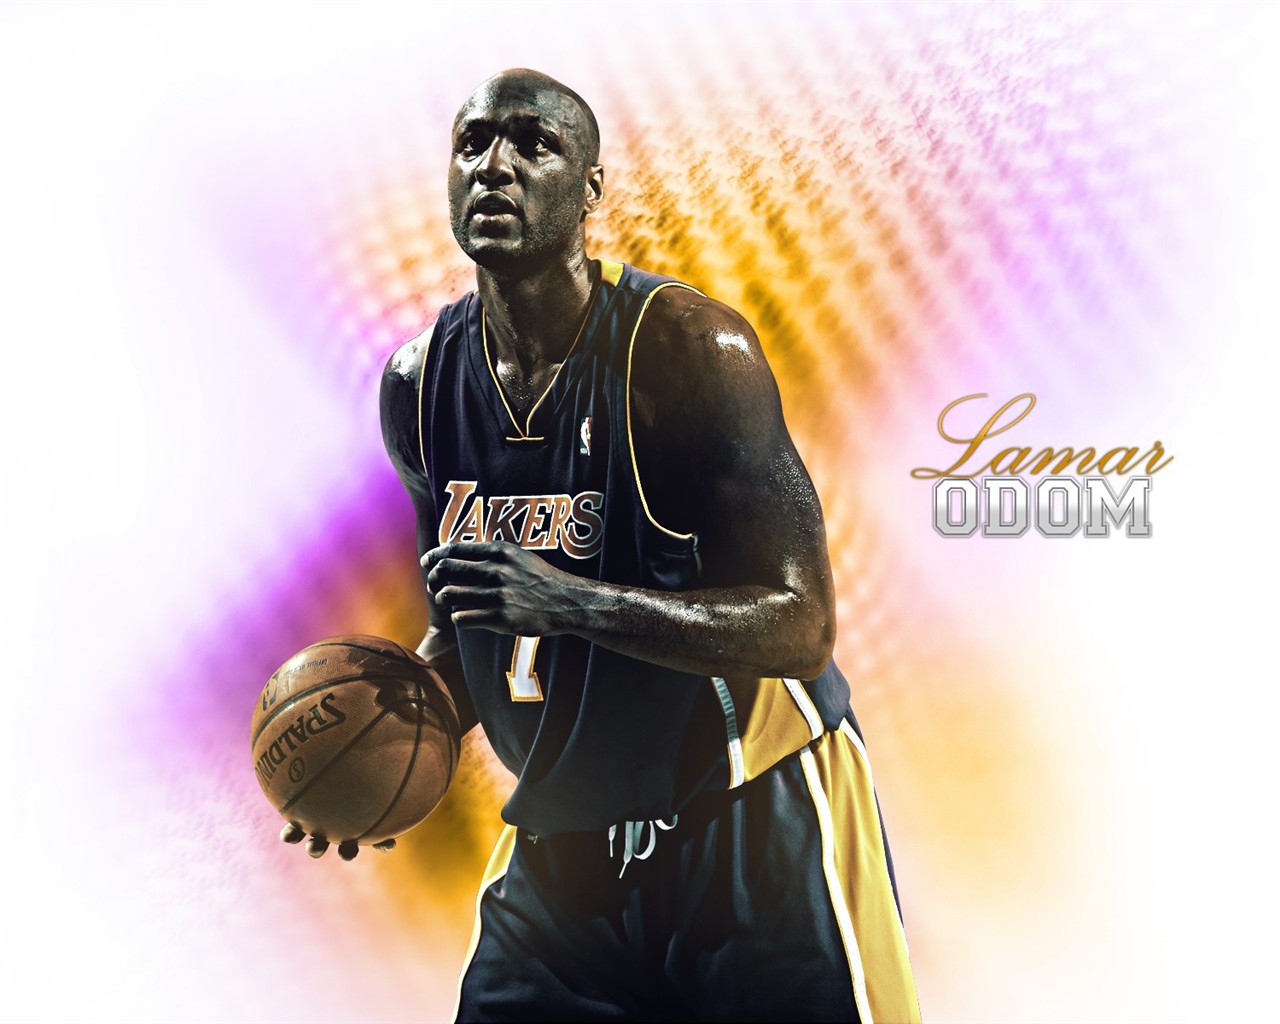 Los Angeles Lakers Wallpaper Oficial #17 - 1280x1024